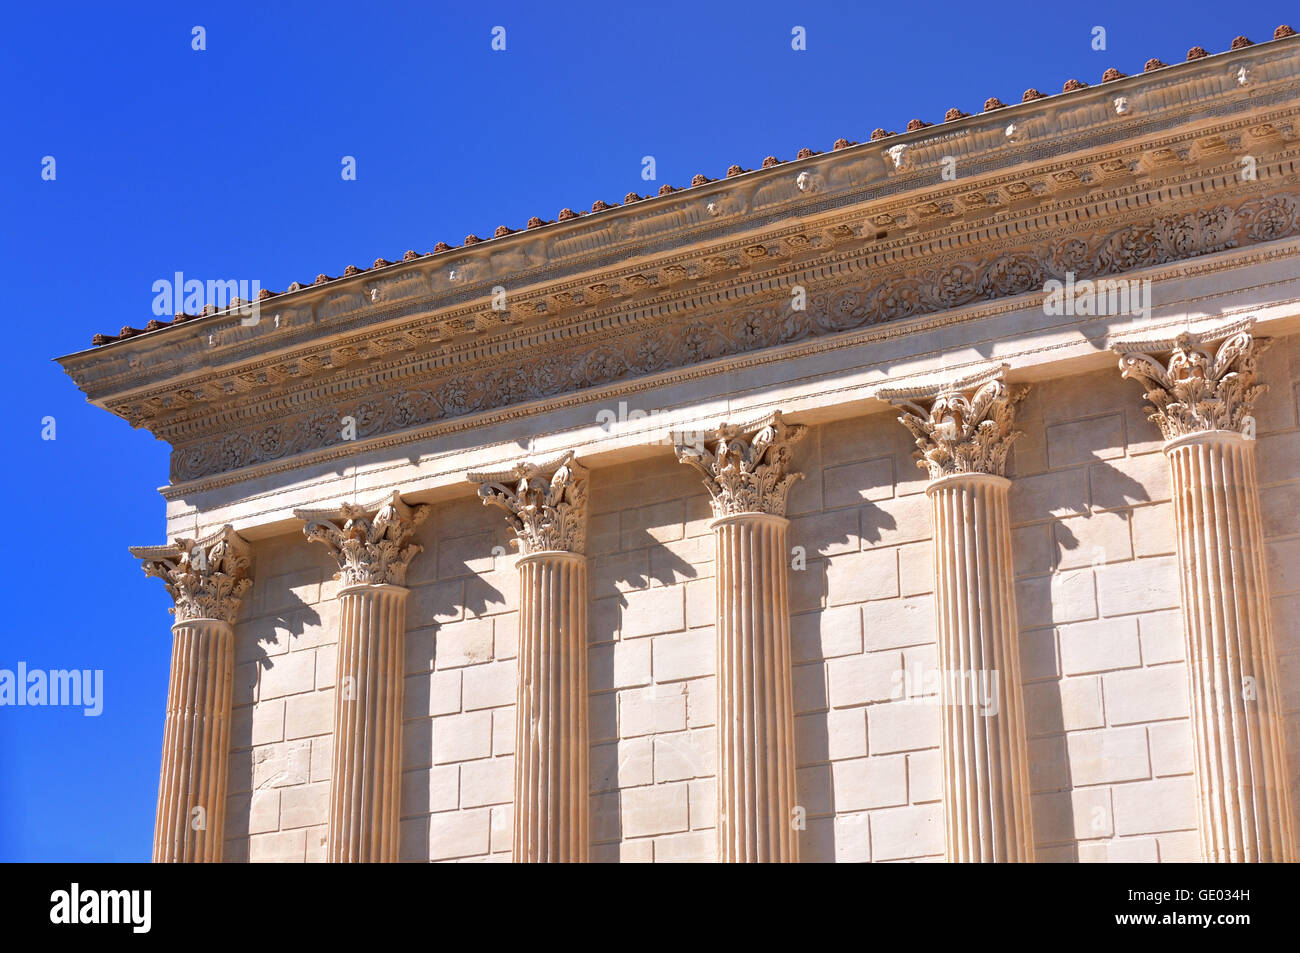 The Maison Carree is an ancient building in Nimes, showing one of the best preserved Roman temple facades. Stock Photo